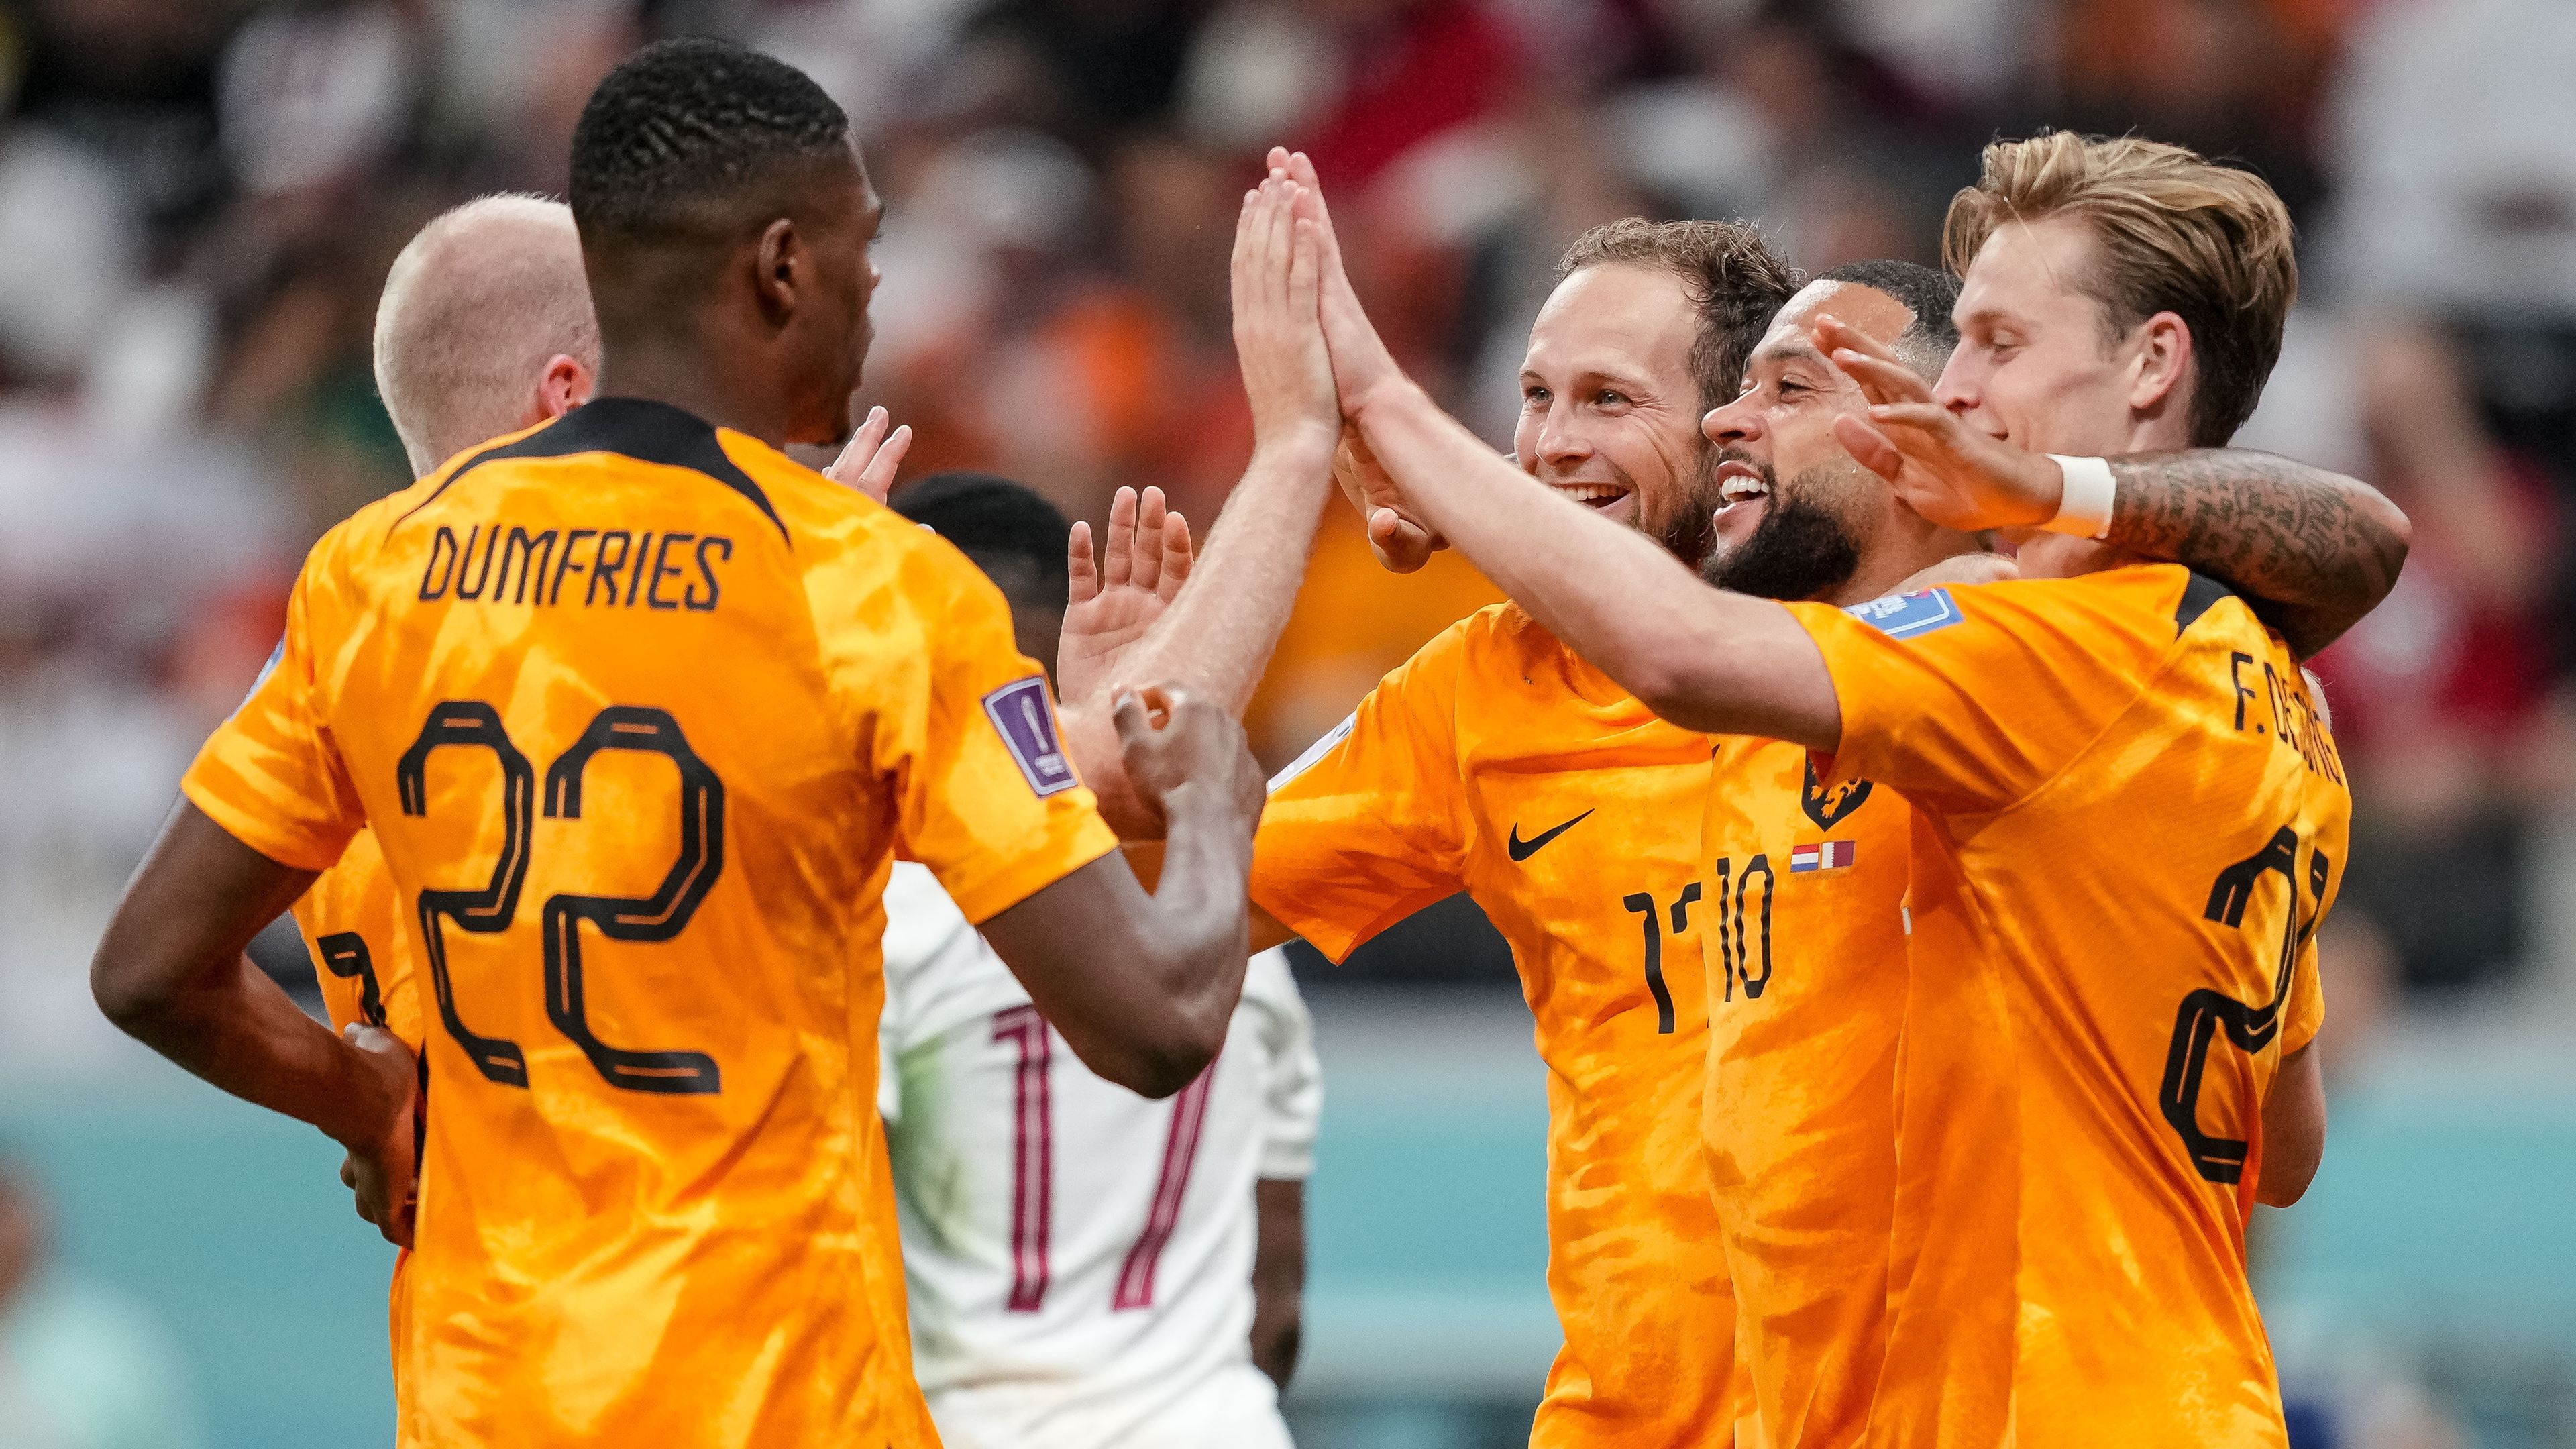 Netherlands win seals Qatar's fate as first World Cup host to lose all three matches before exit